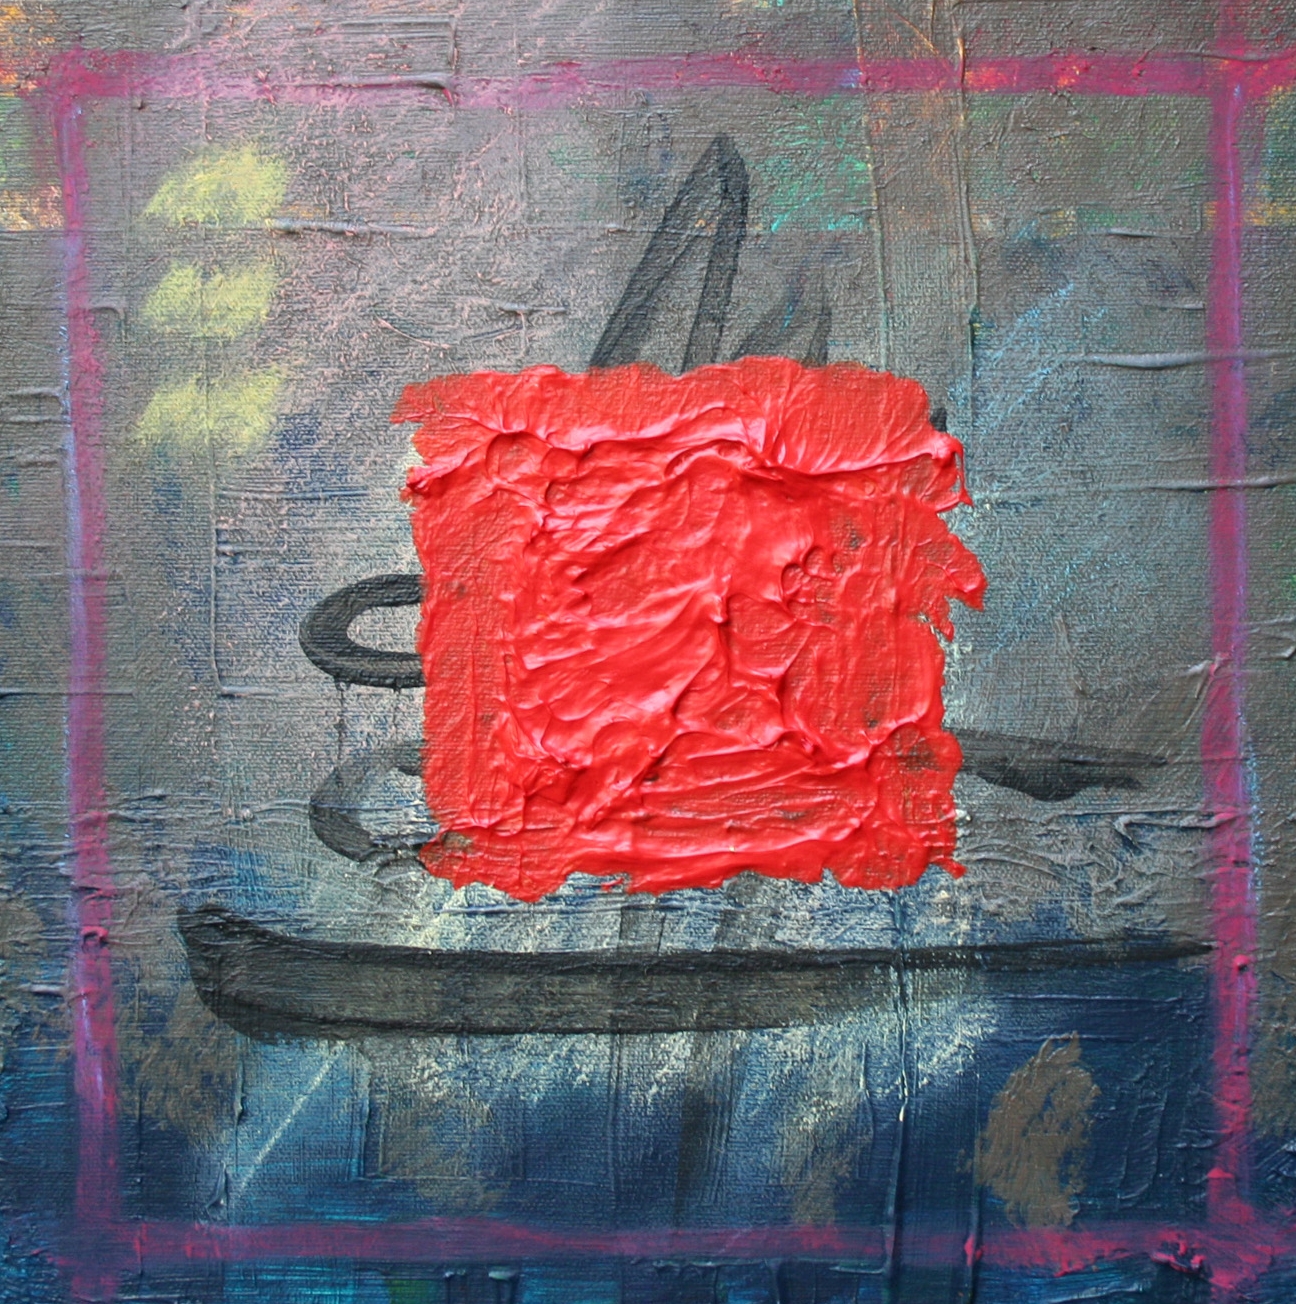 Red Square 3.3 :: 12"x12" :: $200